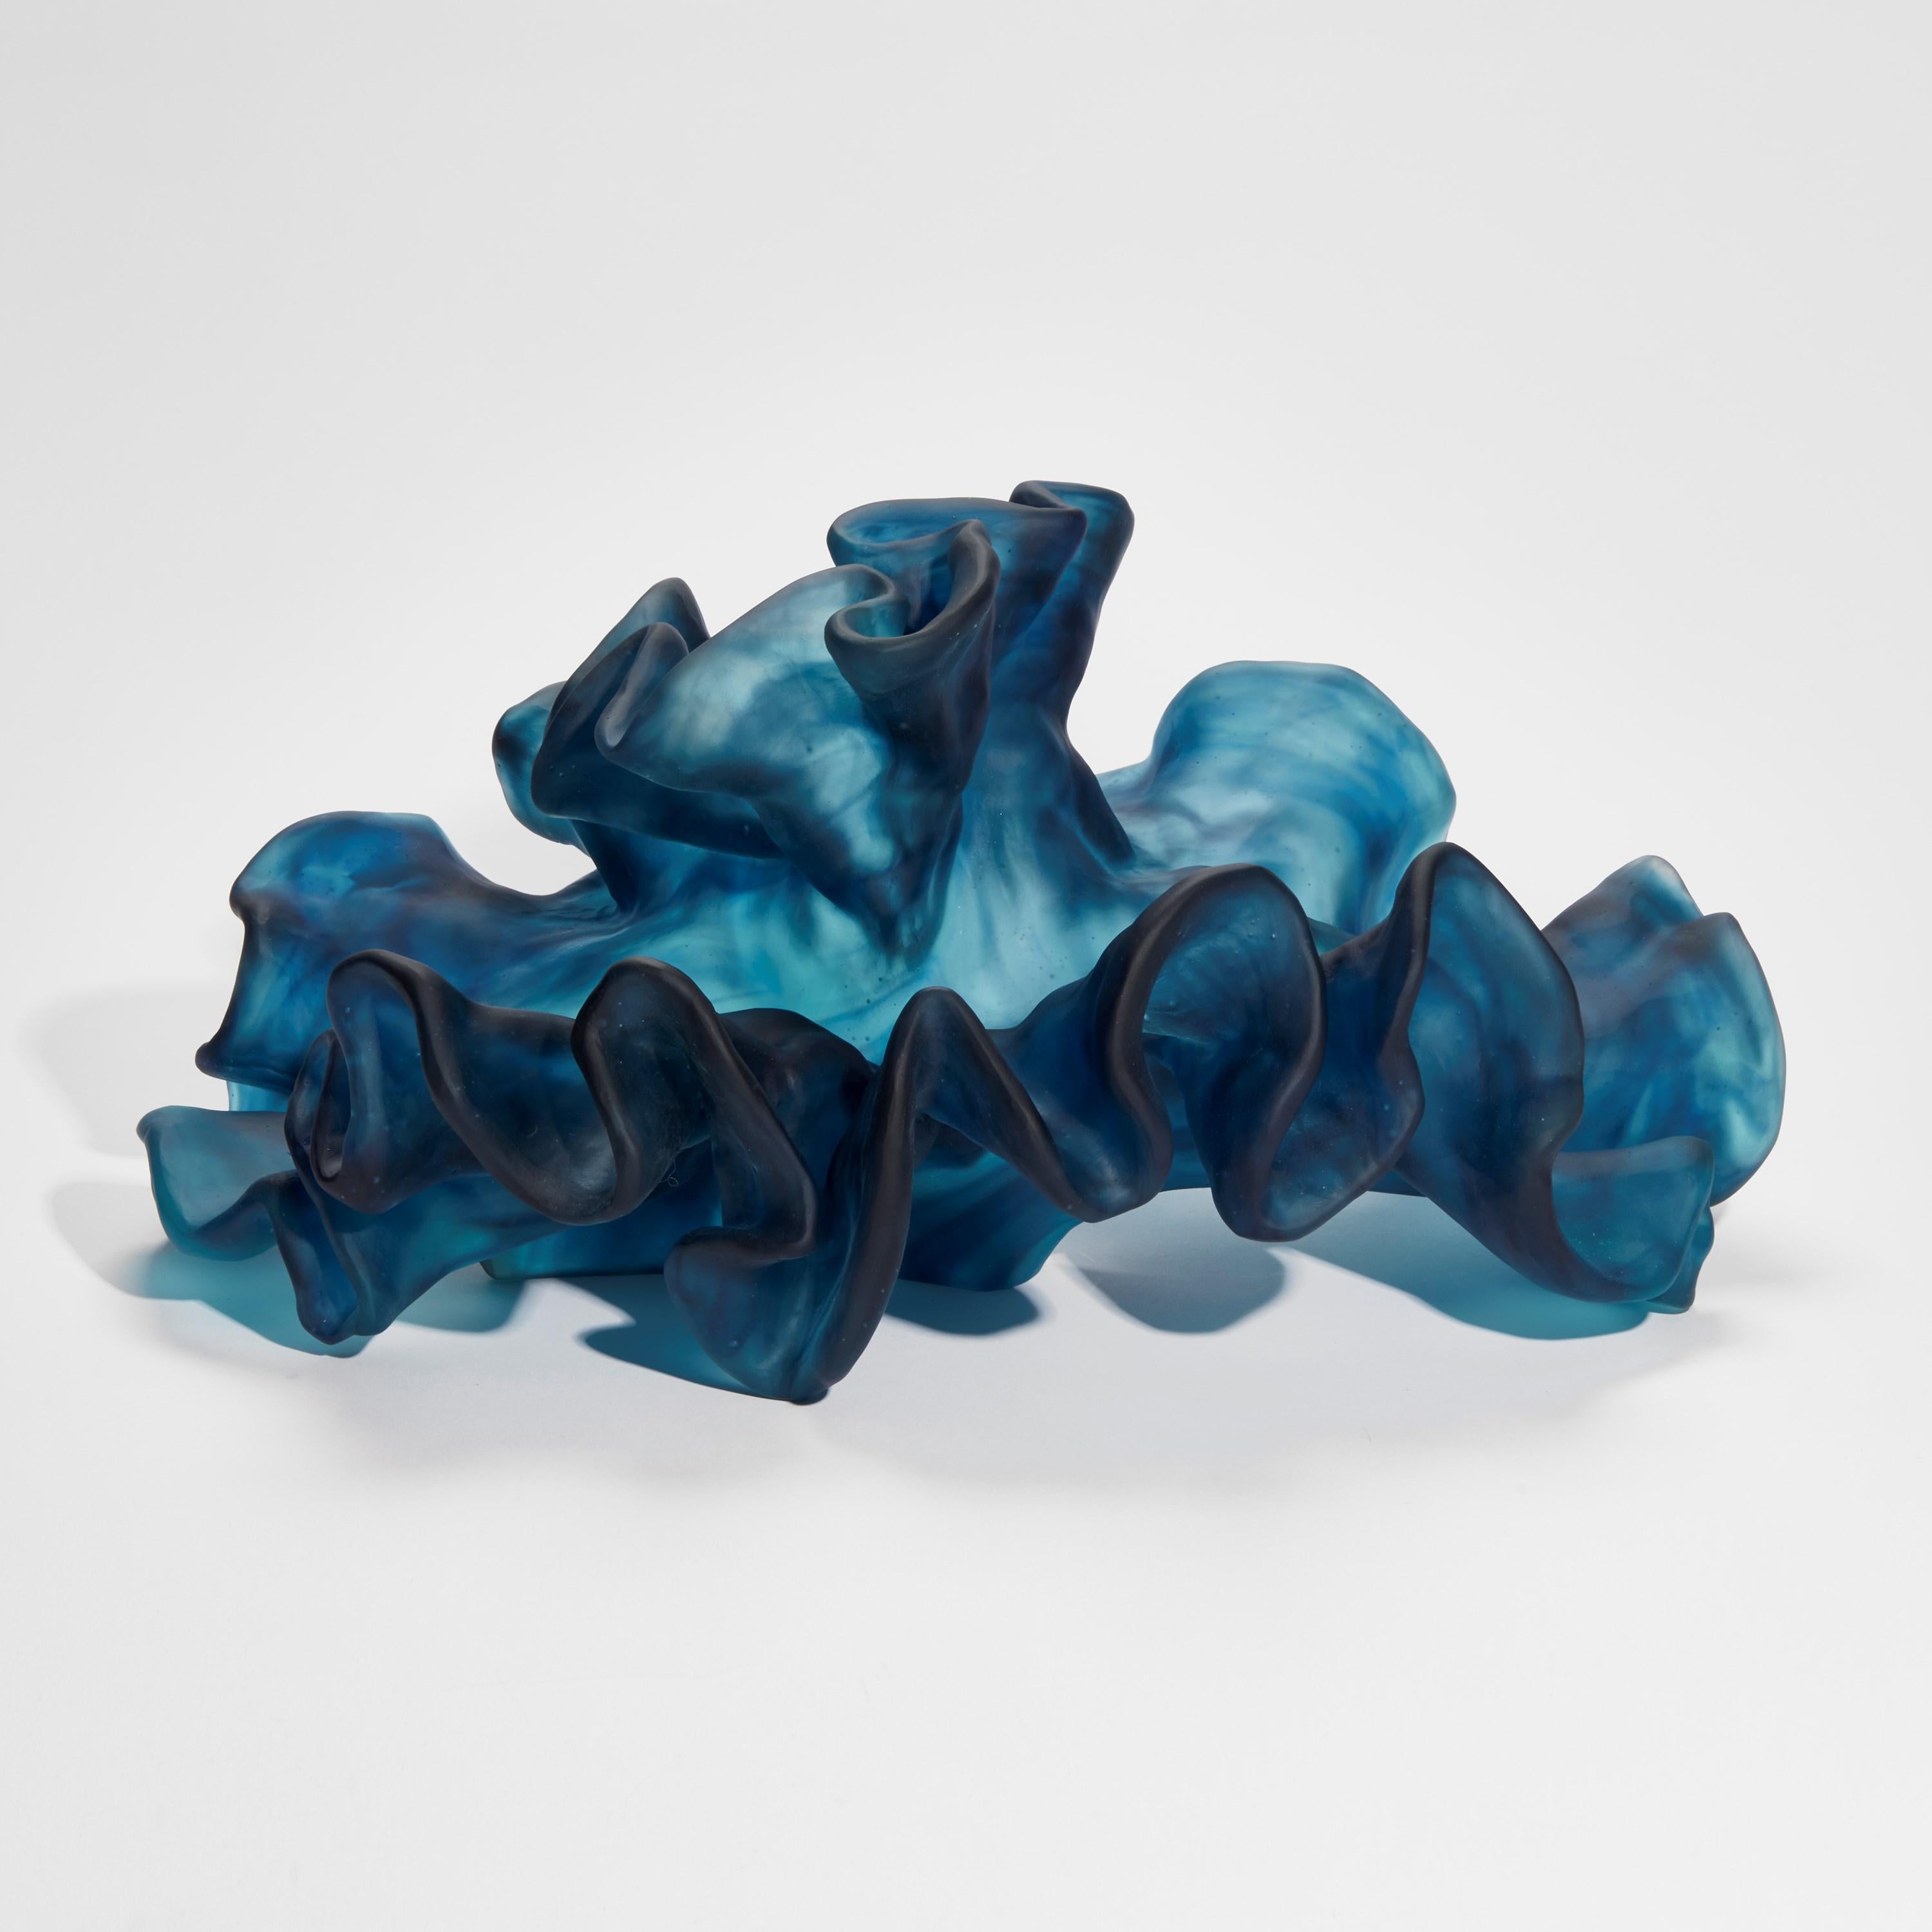 'Enduring Essence' is a unique rich deep blue cast glass sculpture by the Danish artist, Monette Larsen.

Larsen has always been fascinated by the concept of beauty within nature; what makes something beautiful and the characteristics that define